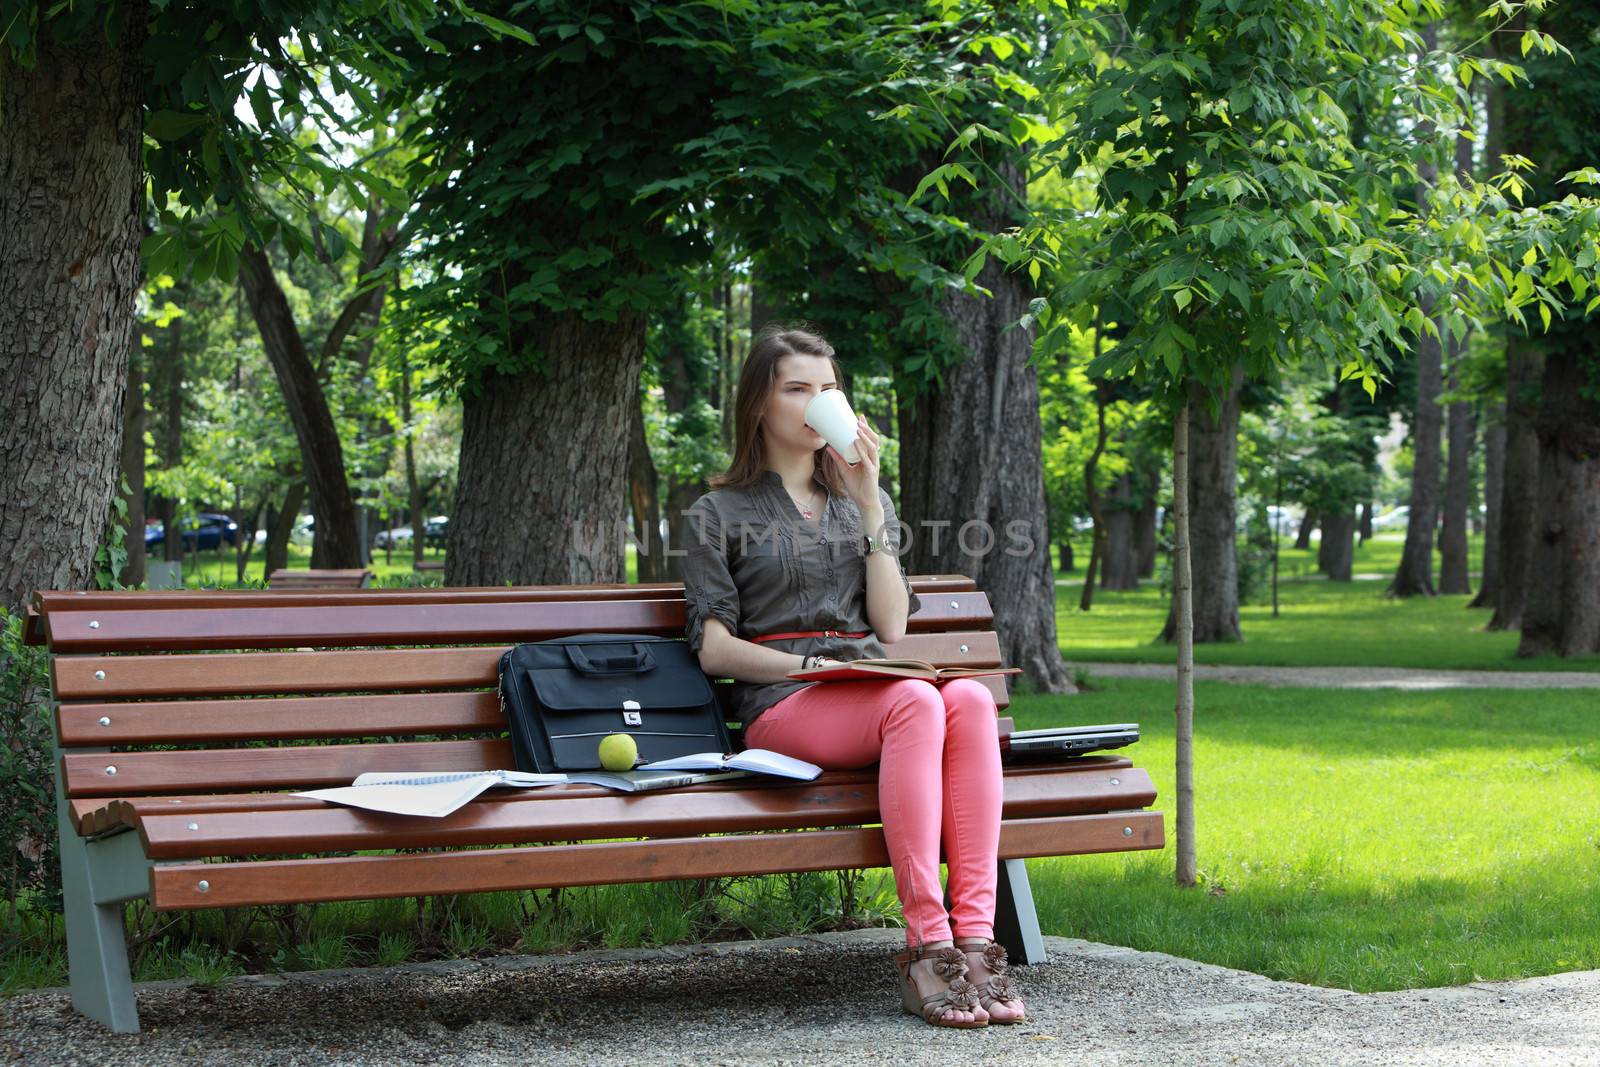 Young student woman drinking coffee while studying outdoor in a park.